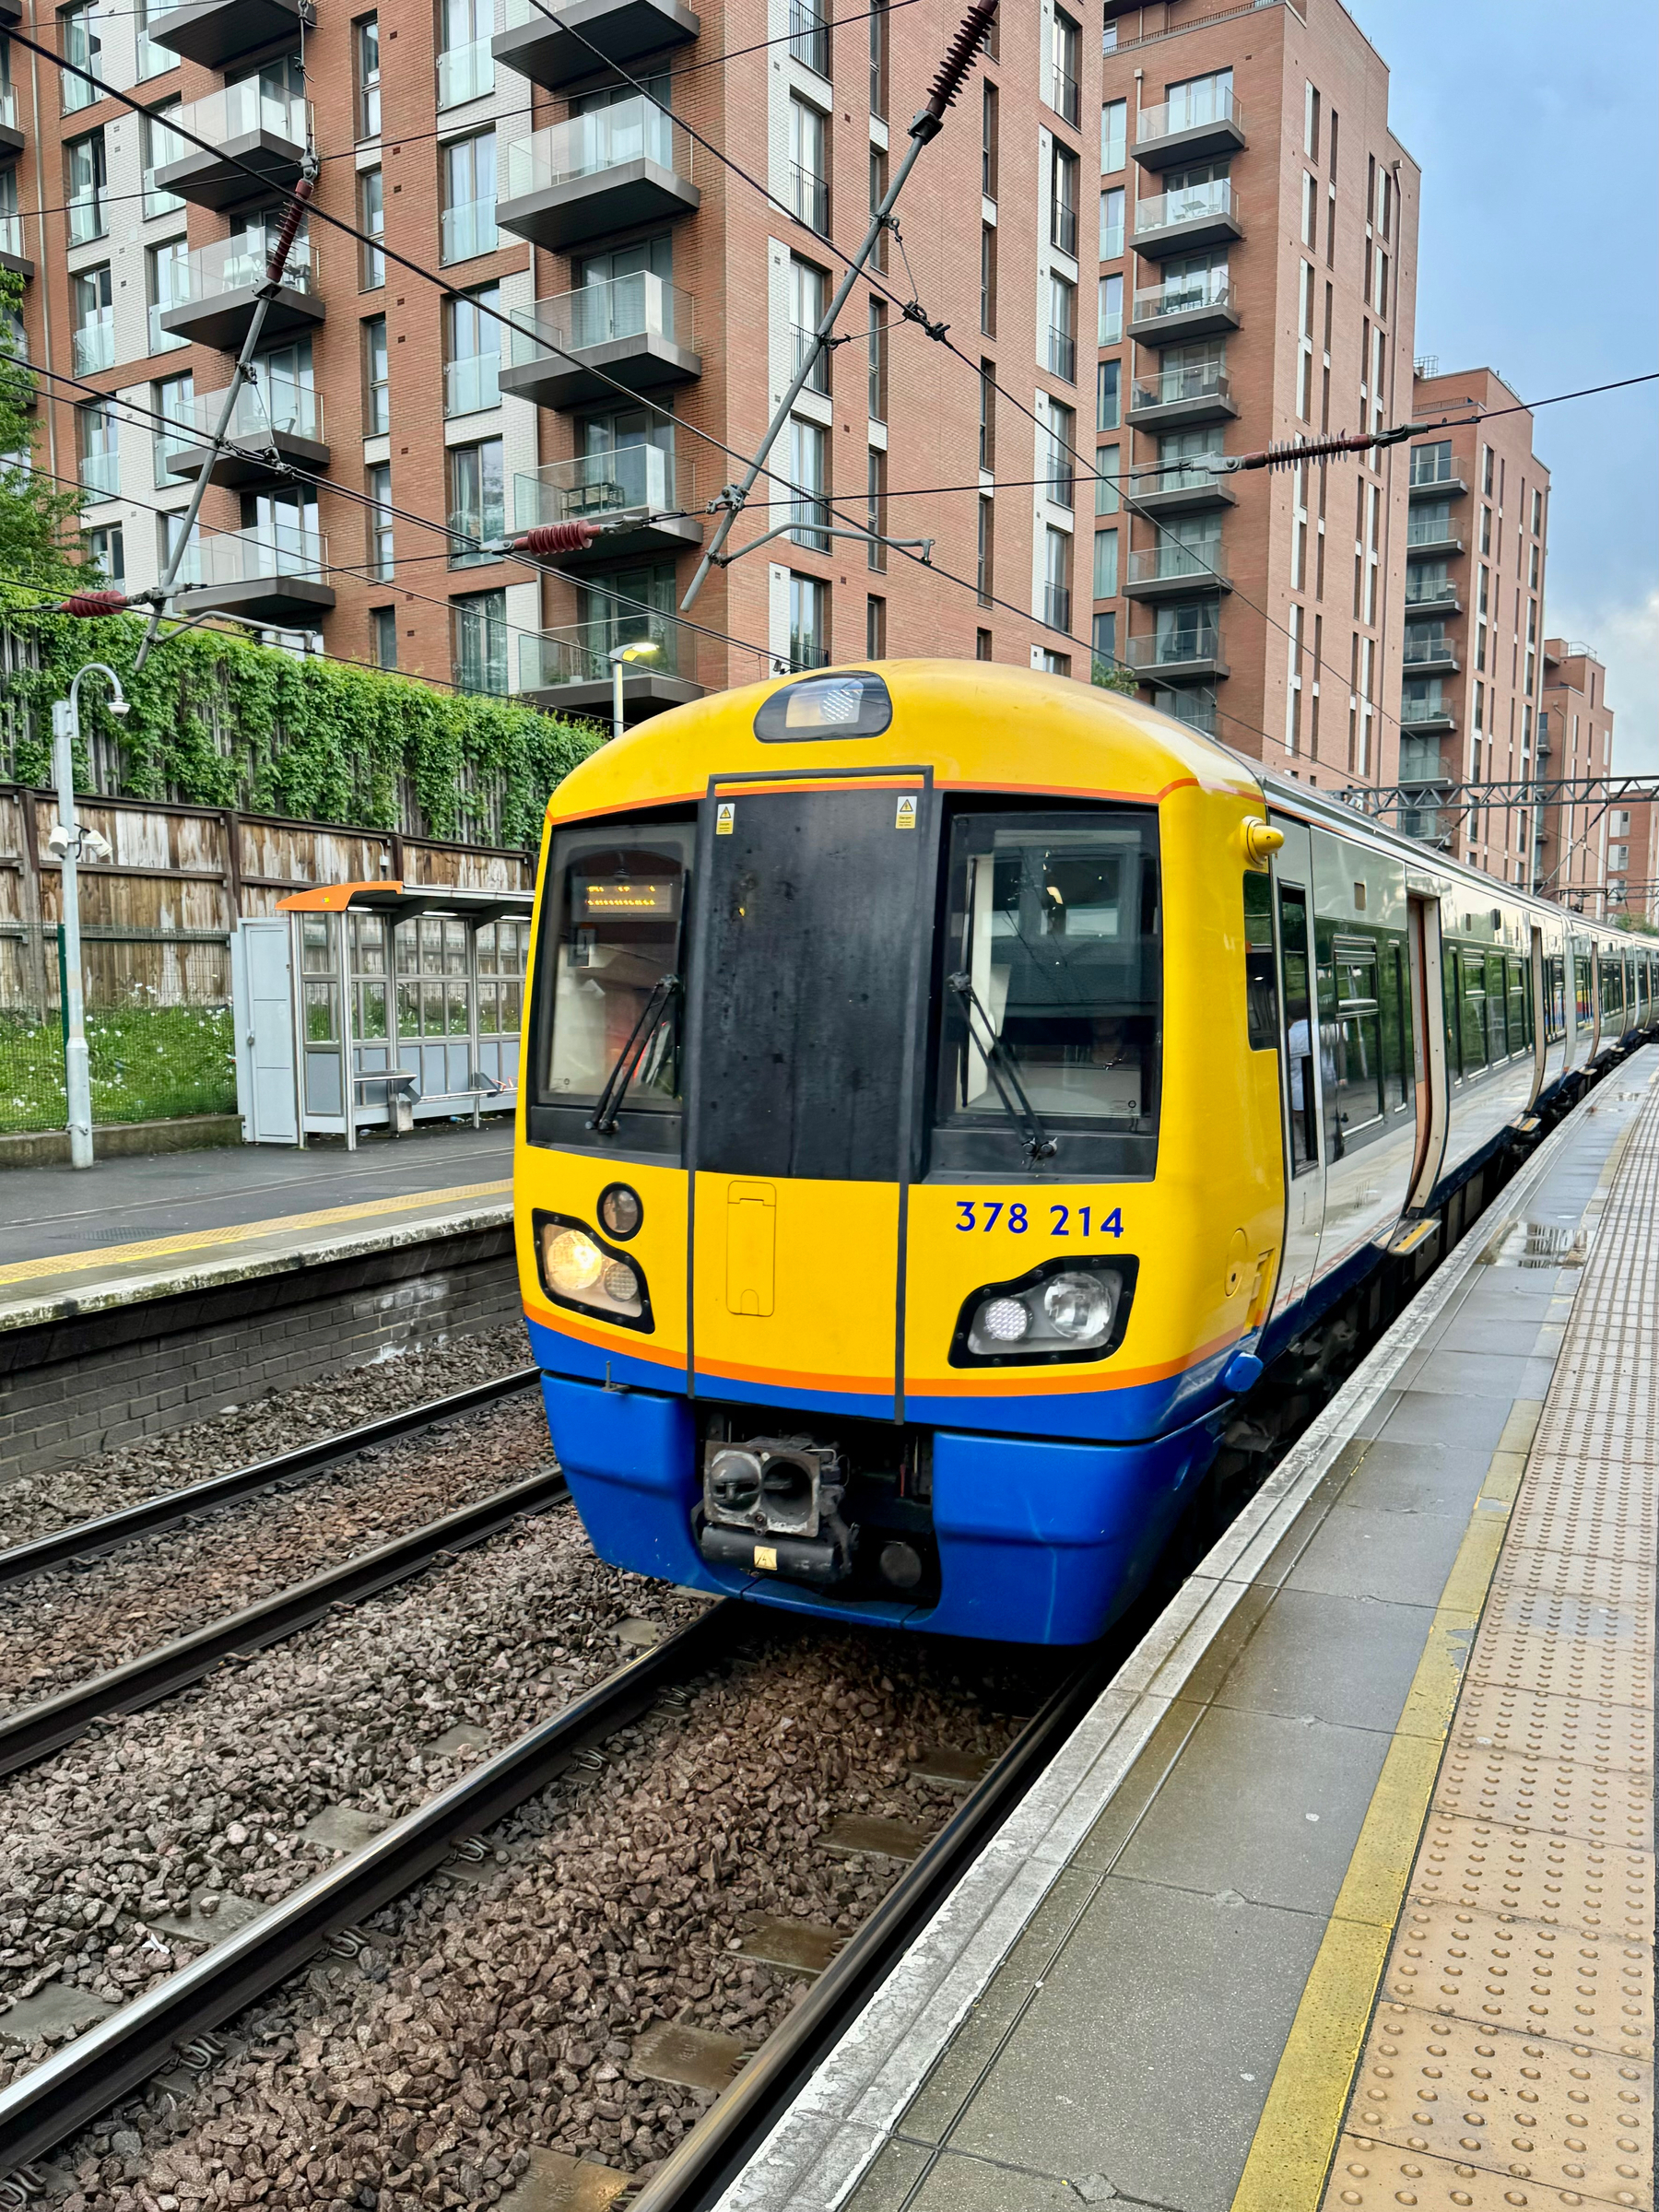 A yellow and blue Overground train, numbered 378 214, at a platform with apartment buildings in the background.